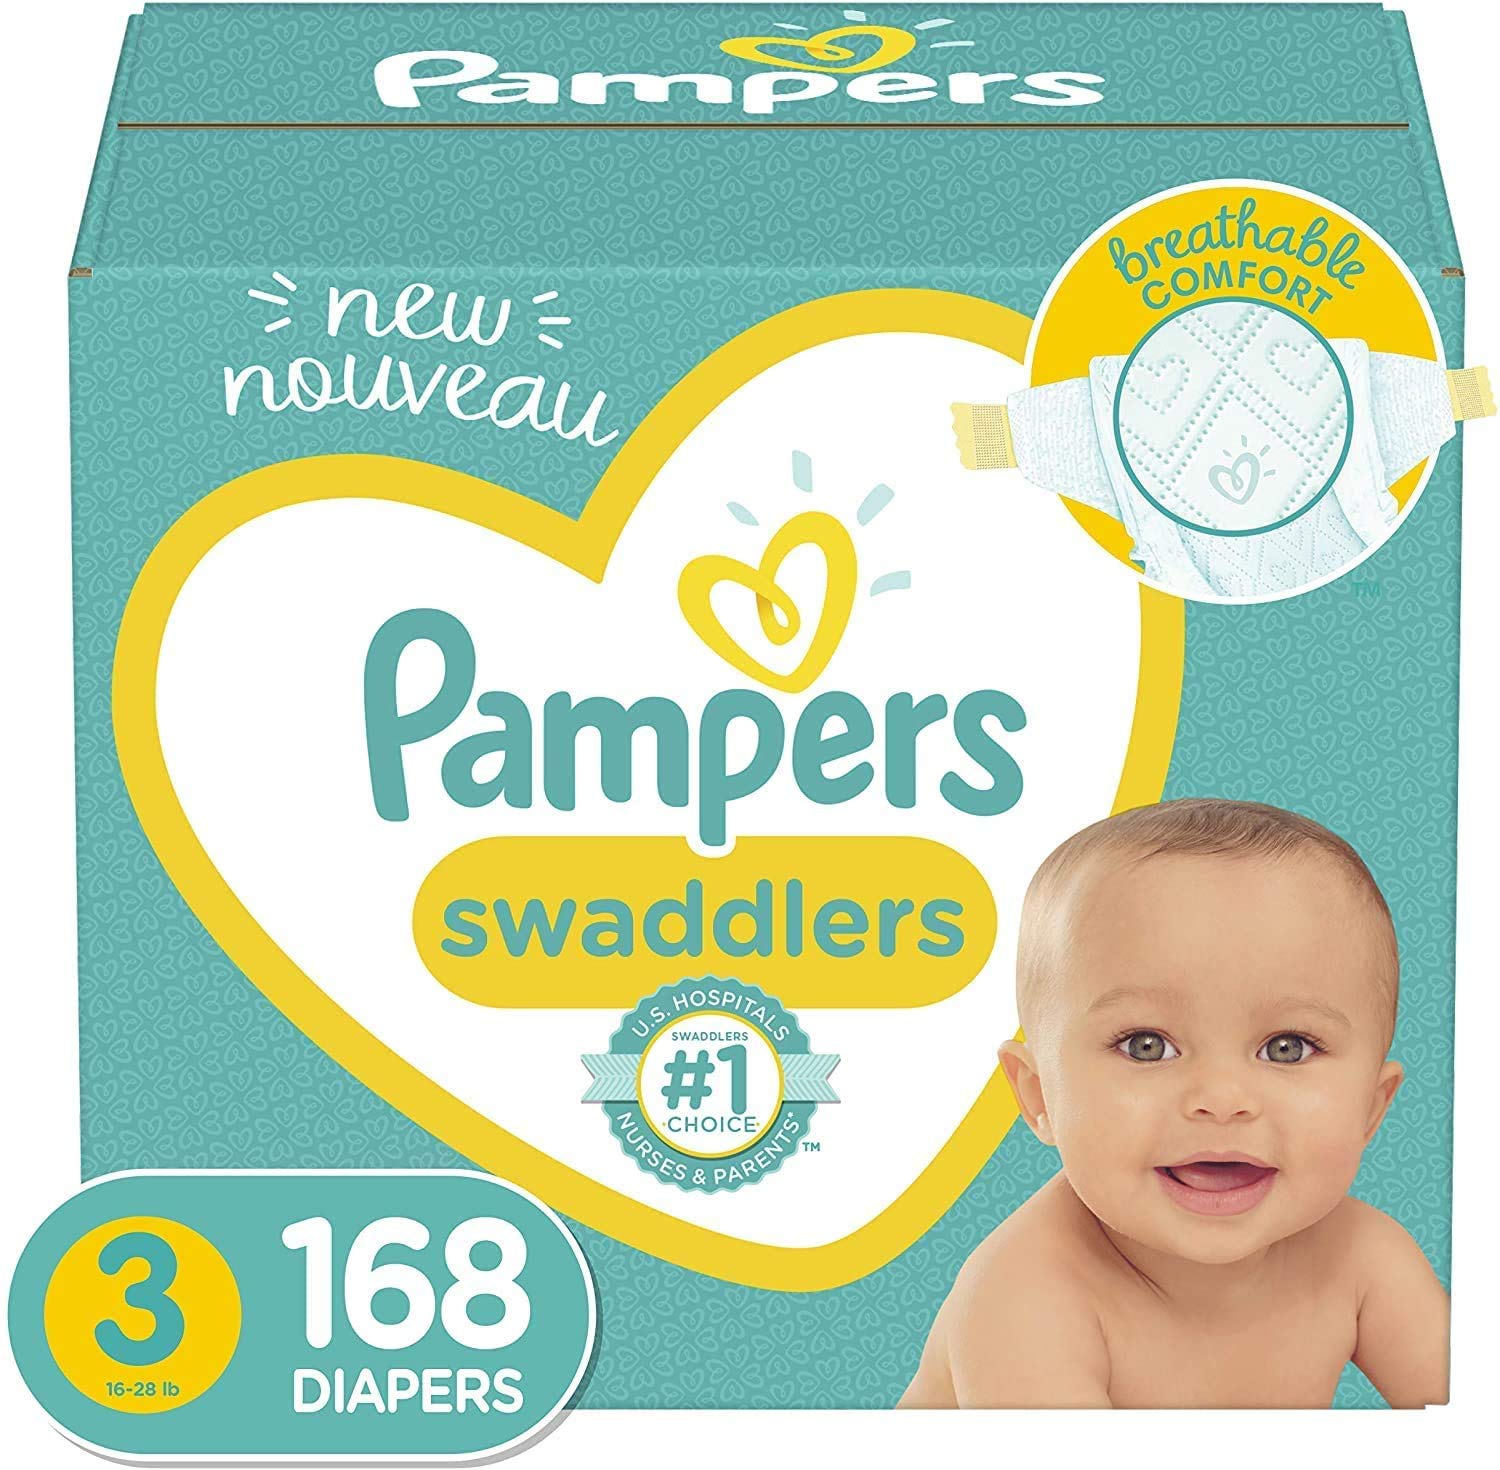 3 lata i pampers